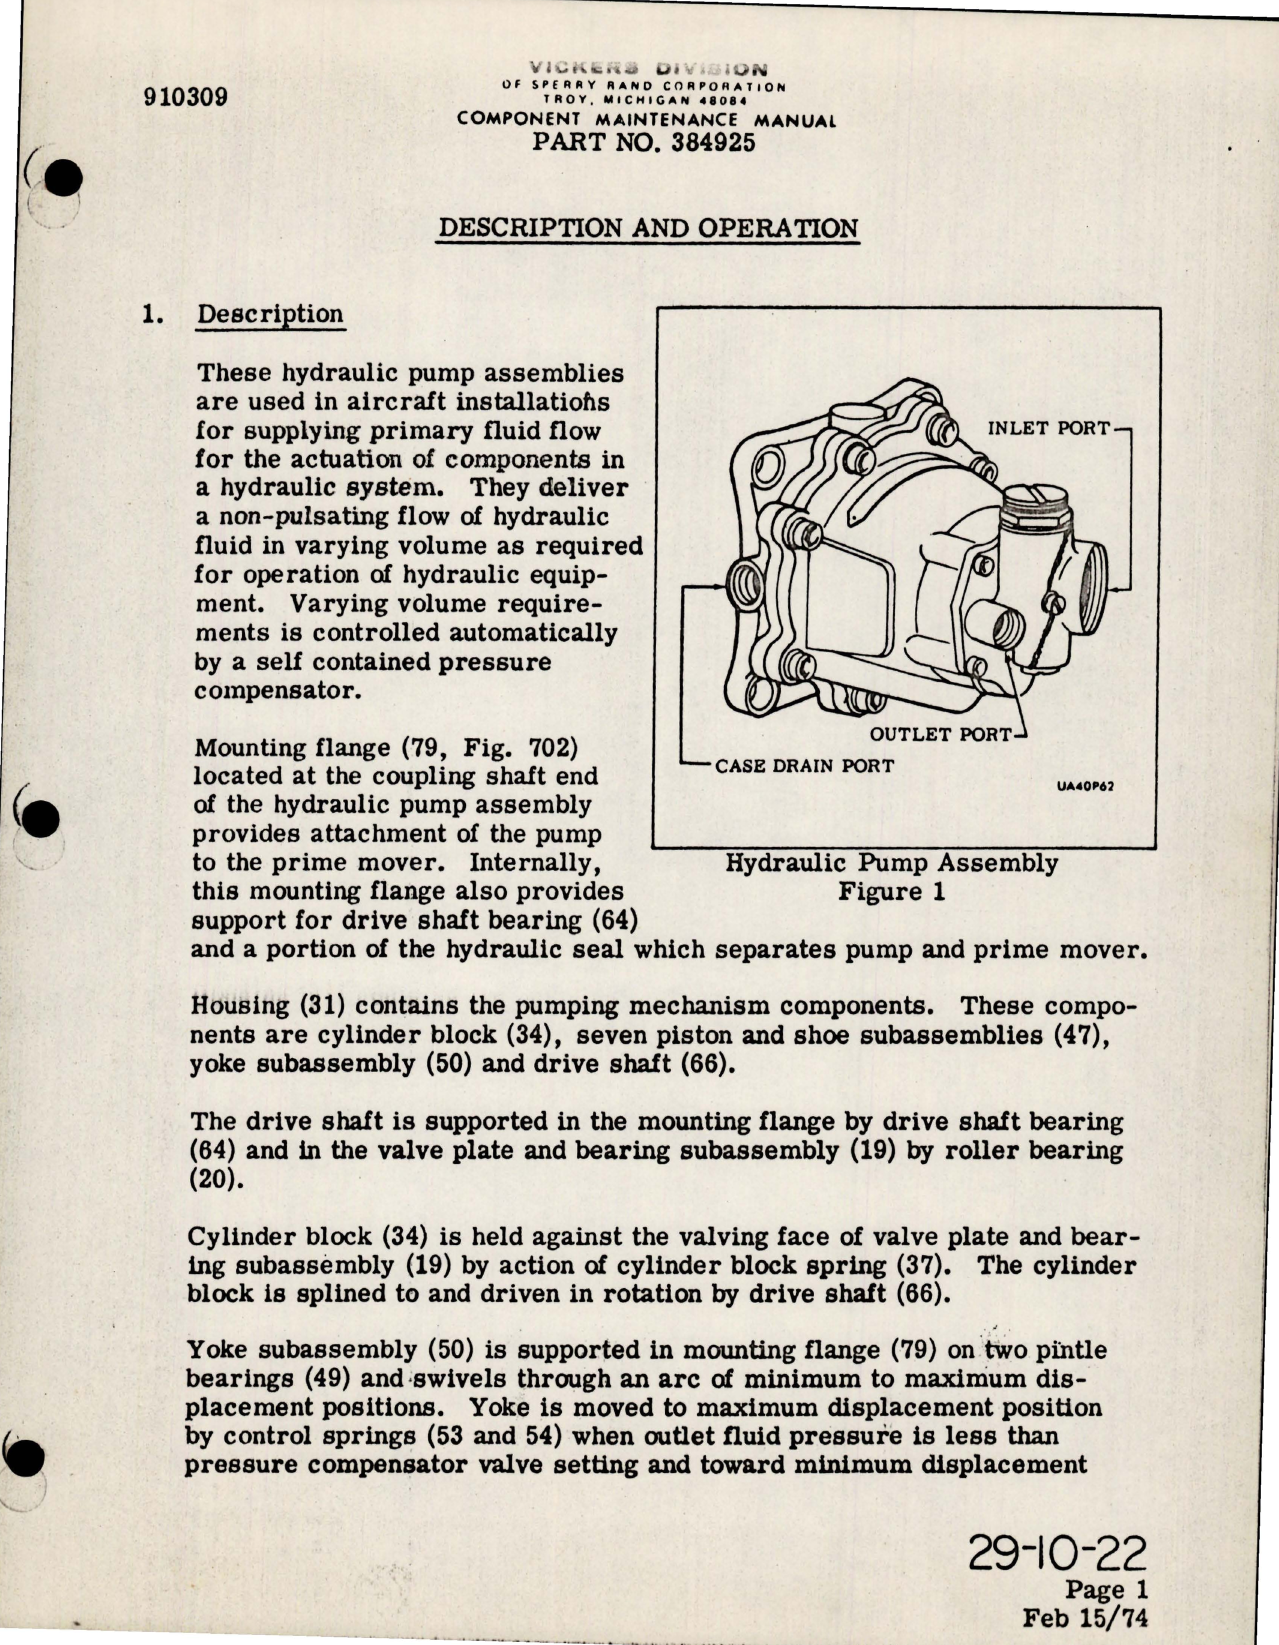 Sample page 7 from AirCorps Library document: Component Maintenance Manual for Hydraulic Pump - Part 384925 - Model PV3-044-26